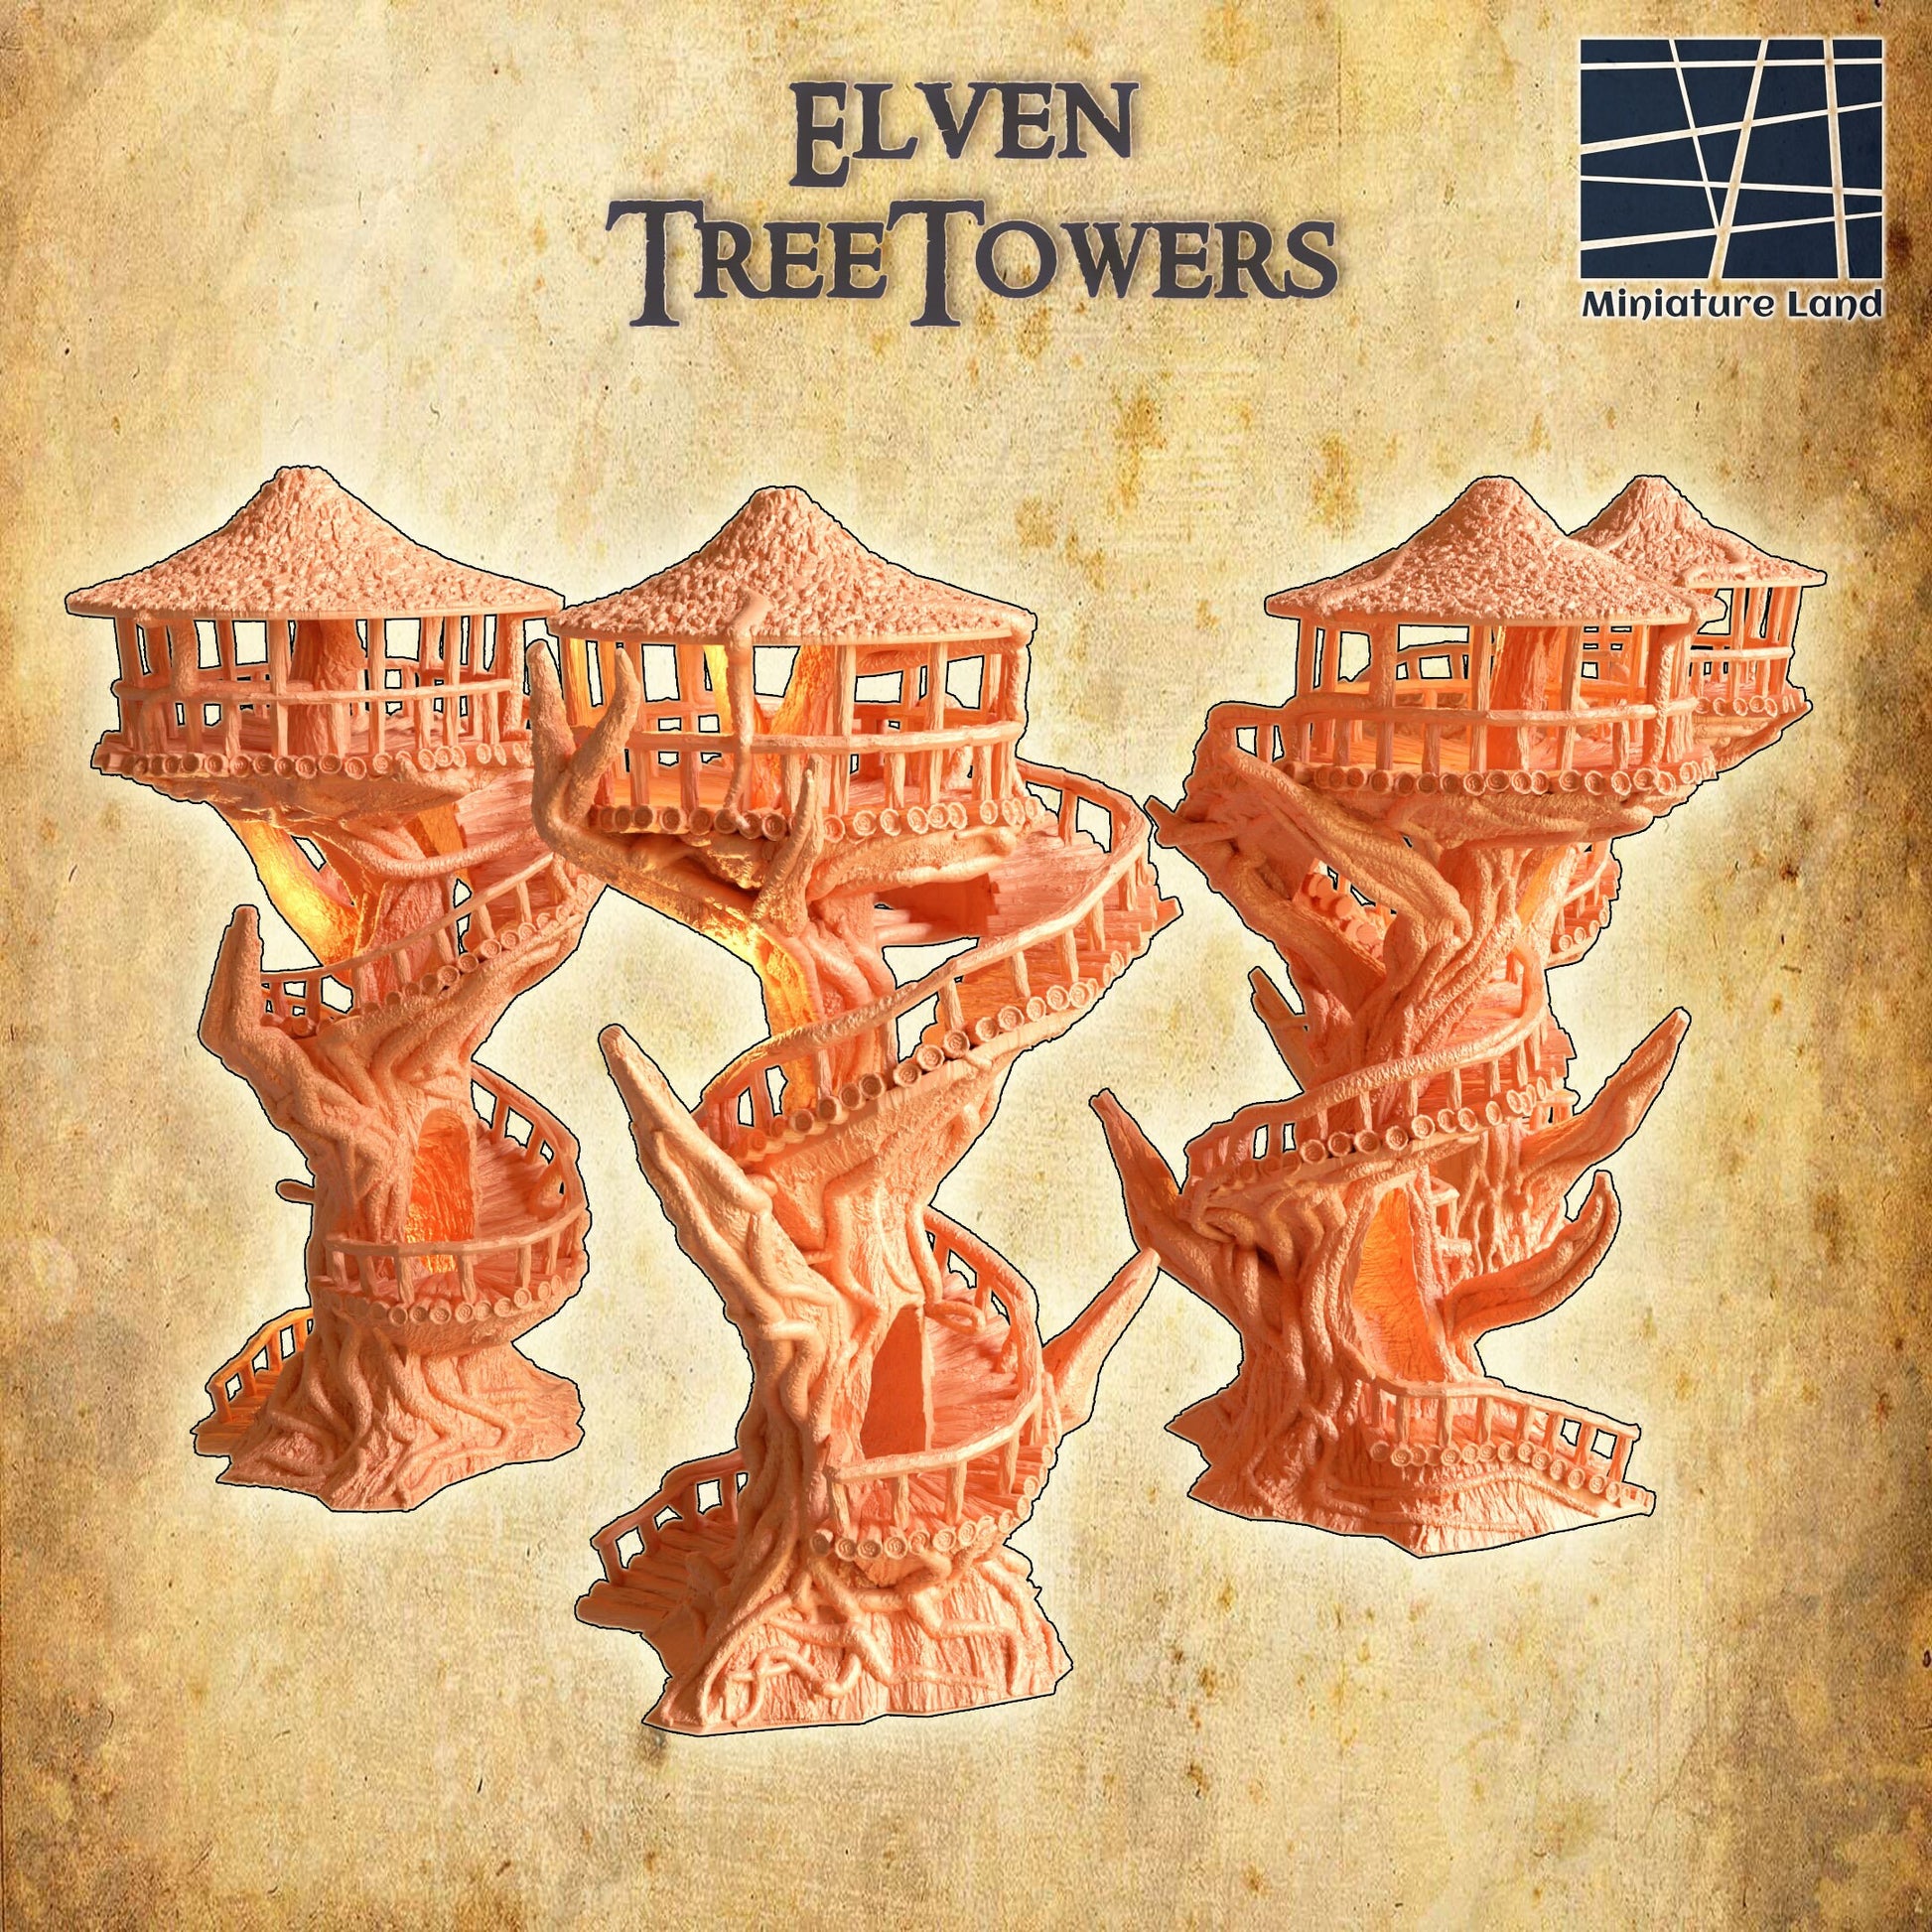 Elven Tree Towers, 3 Levels, 4 Towers